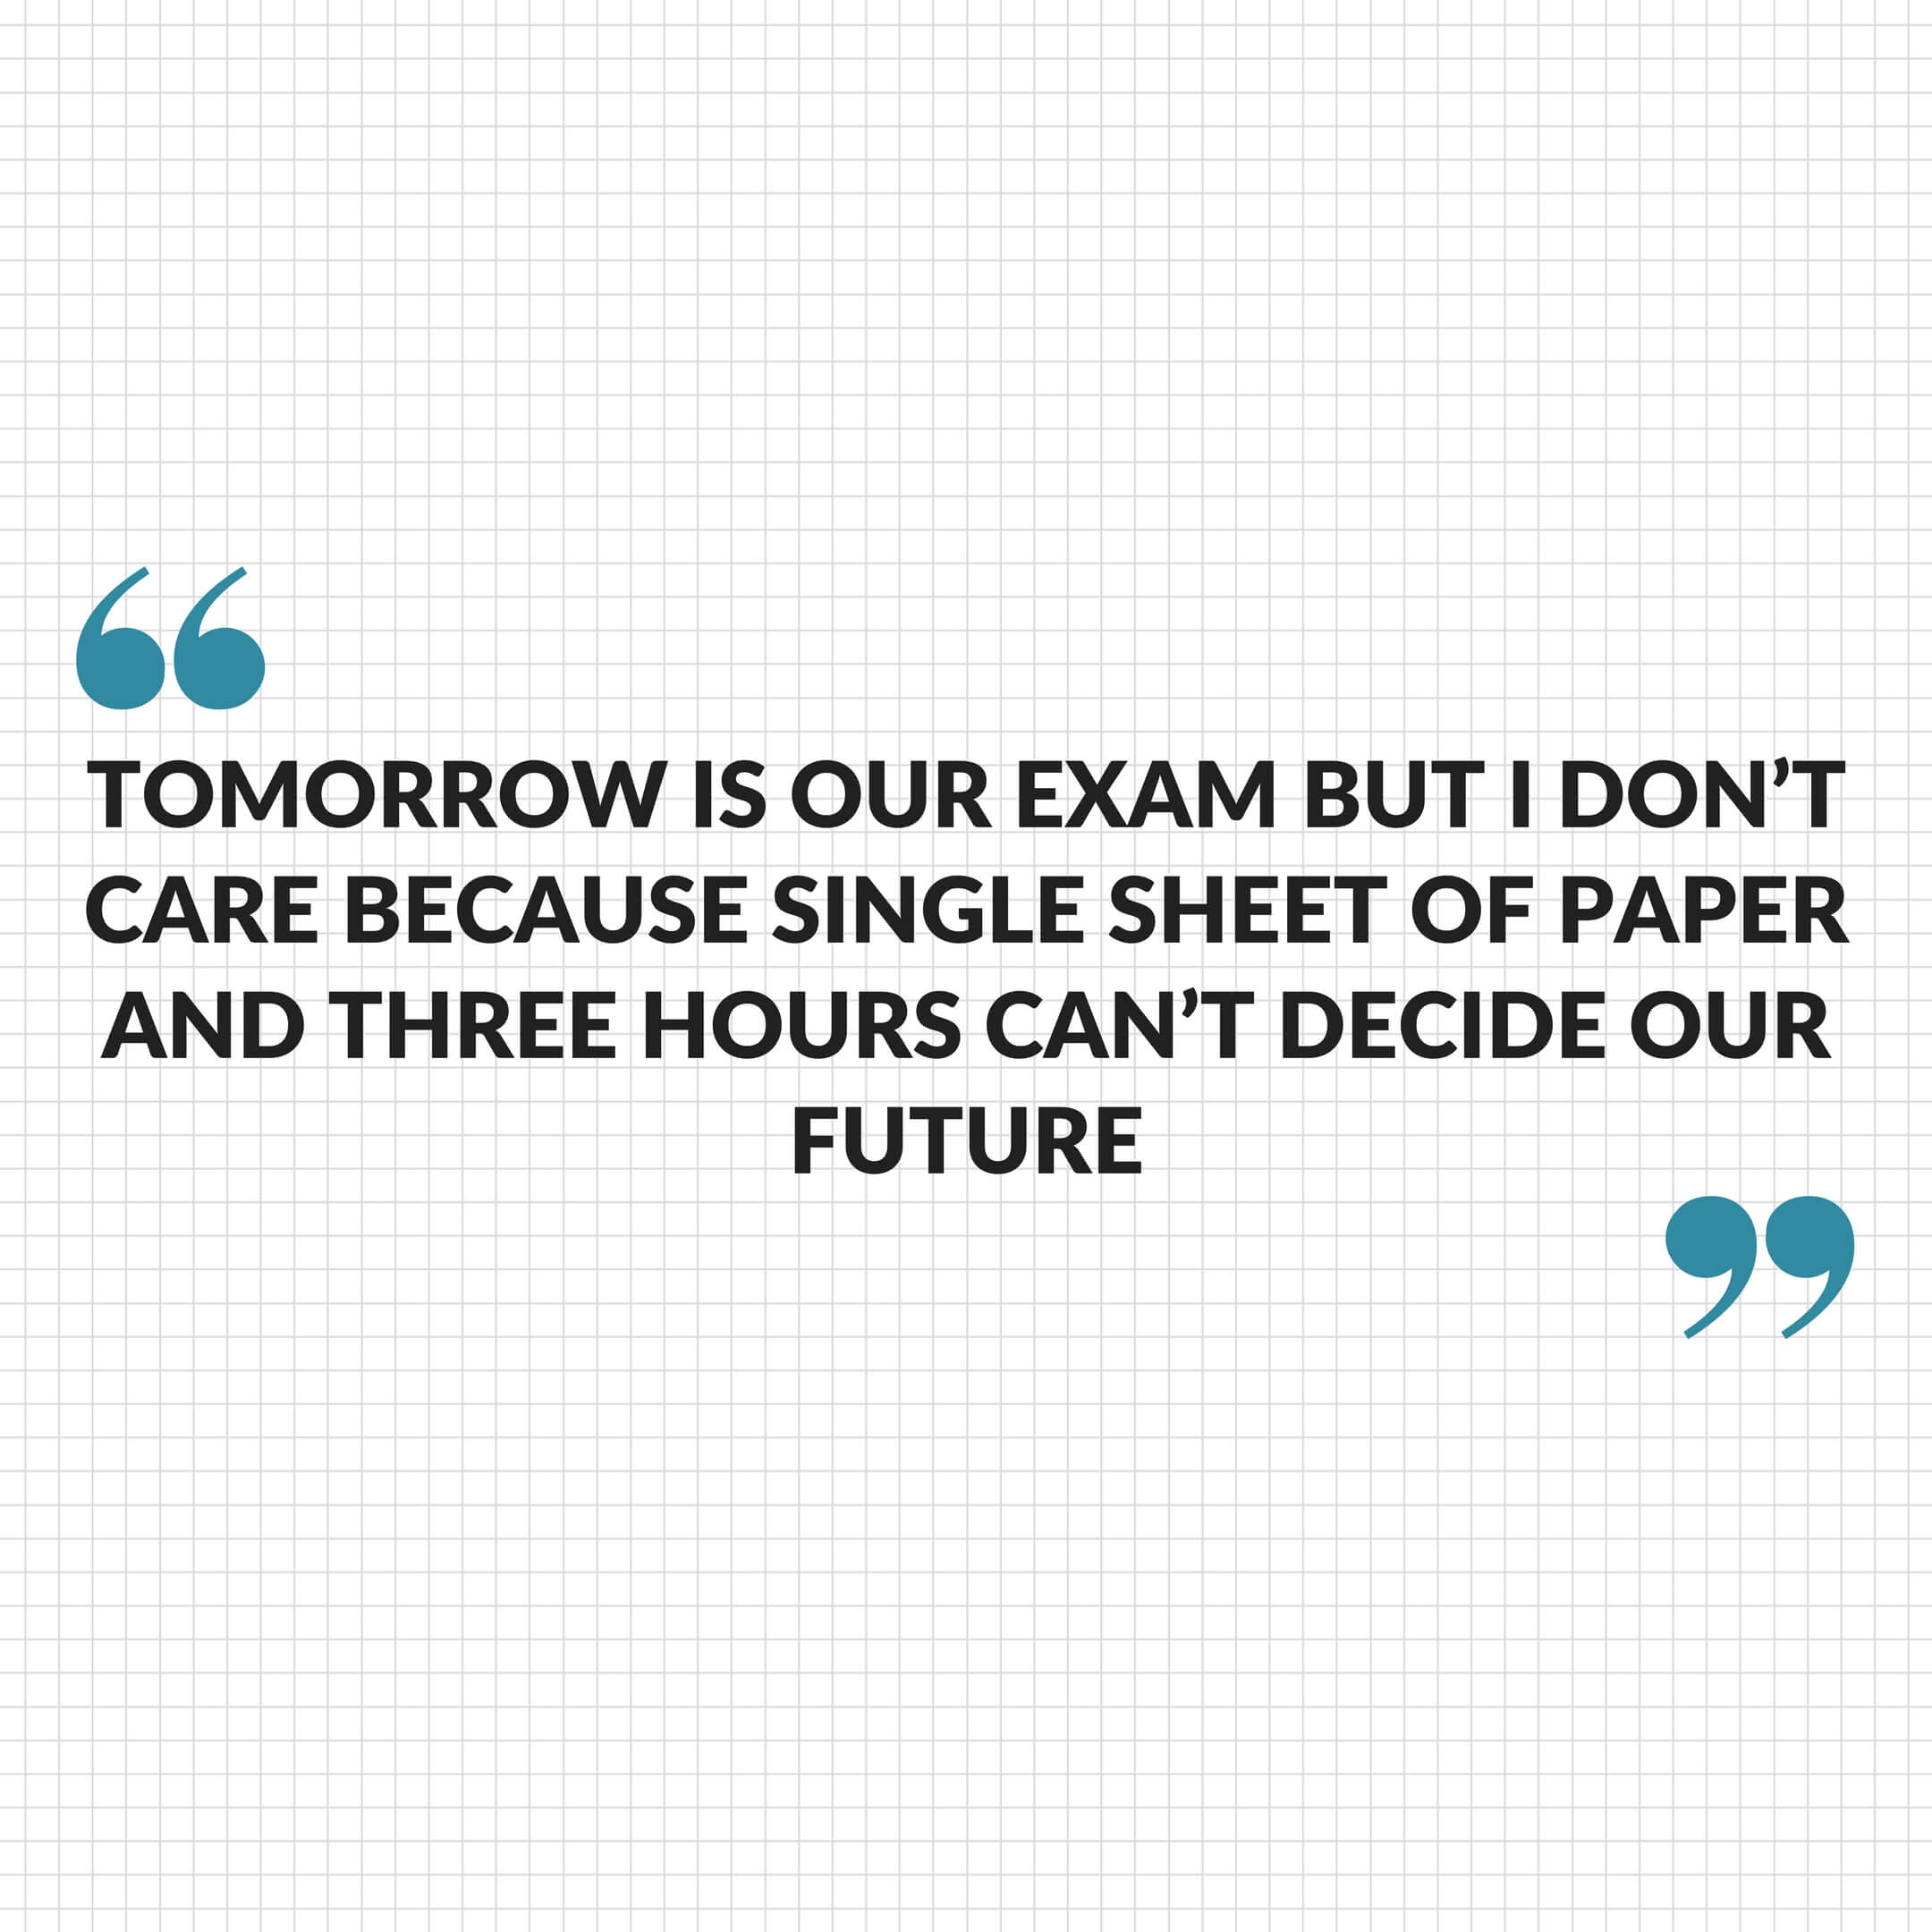 Tomorrow is our exam but I don't care because single sheet of paper and three hours can't decide our future - Best Of Luck Quotes